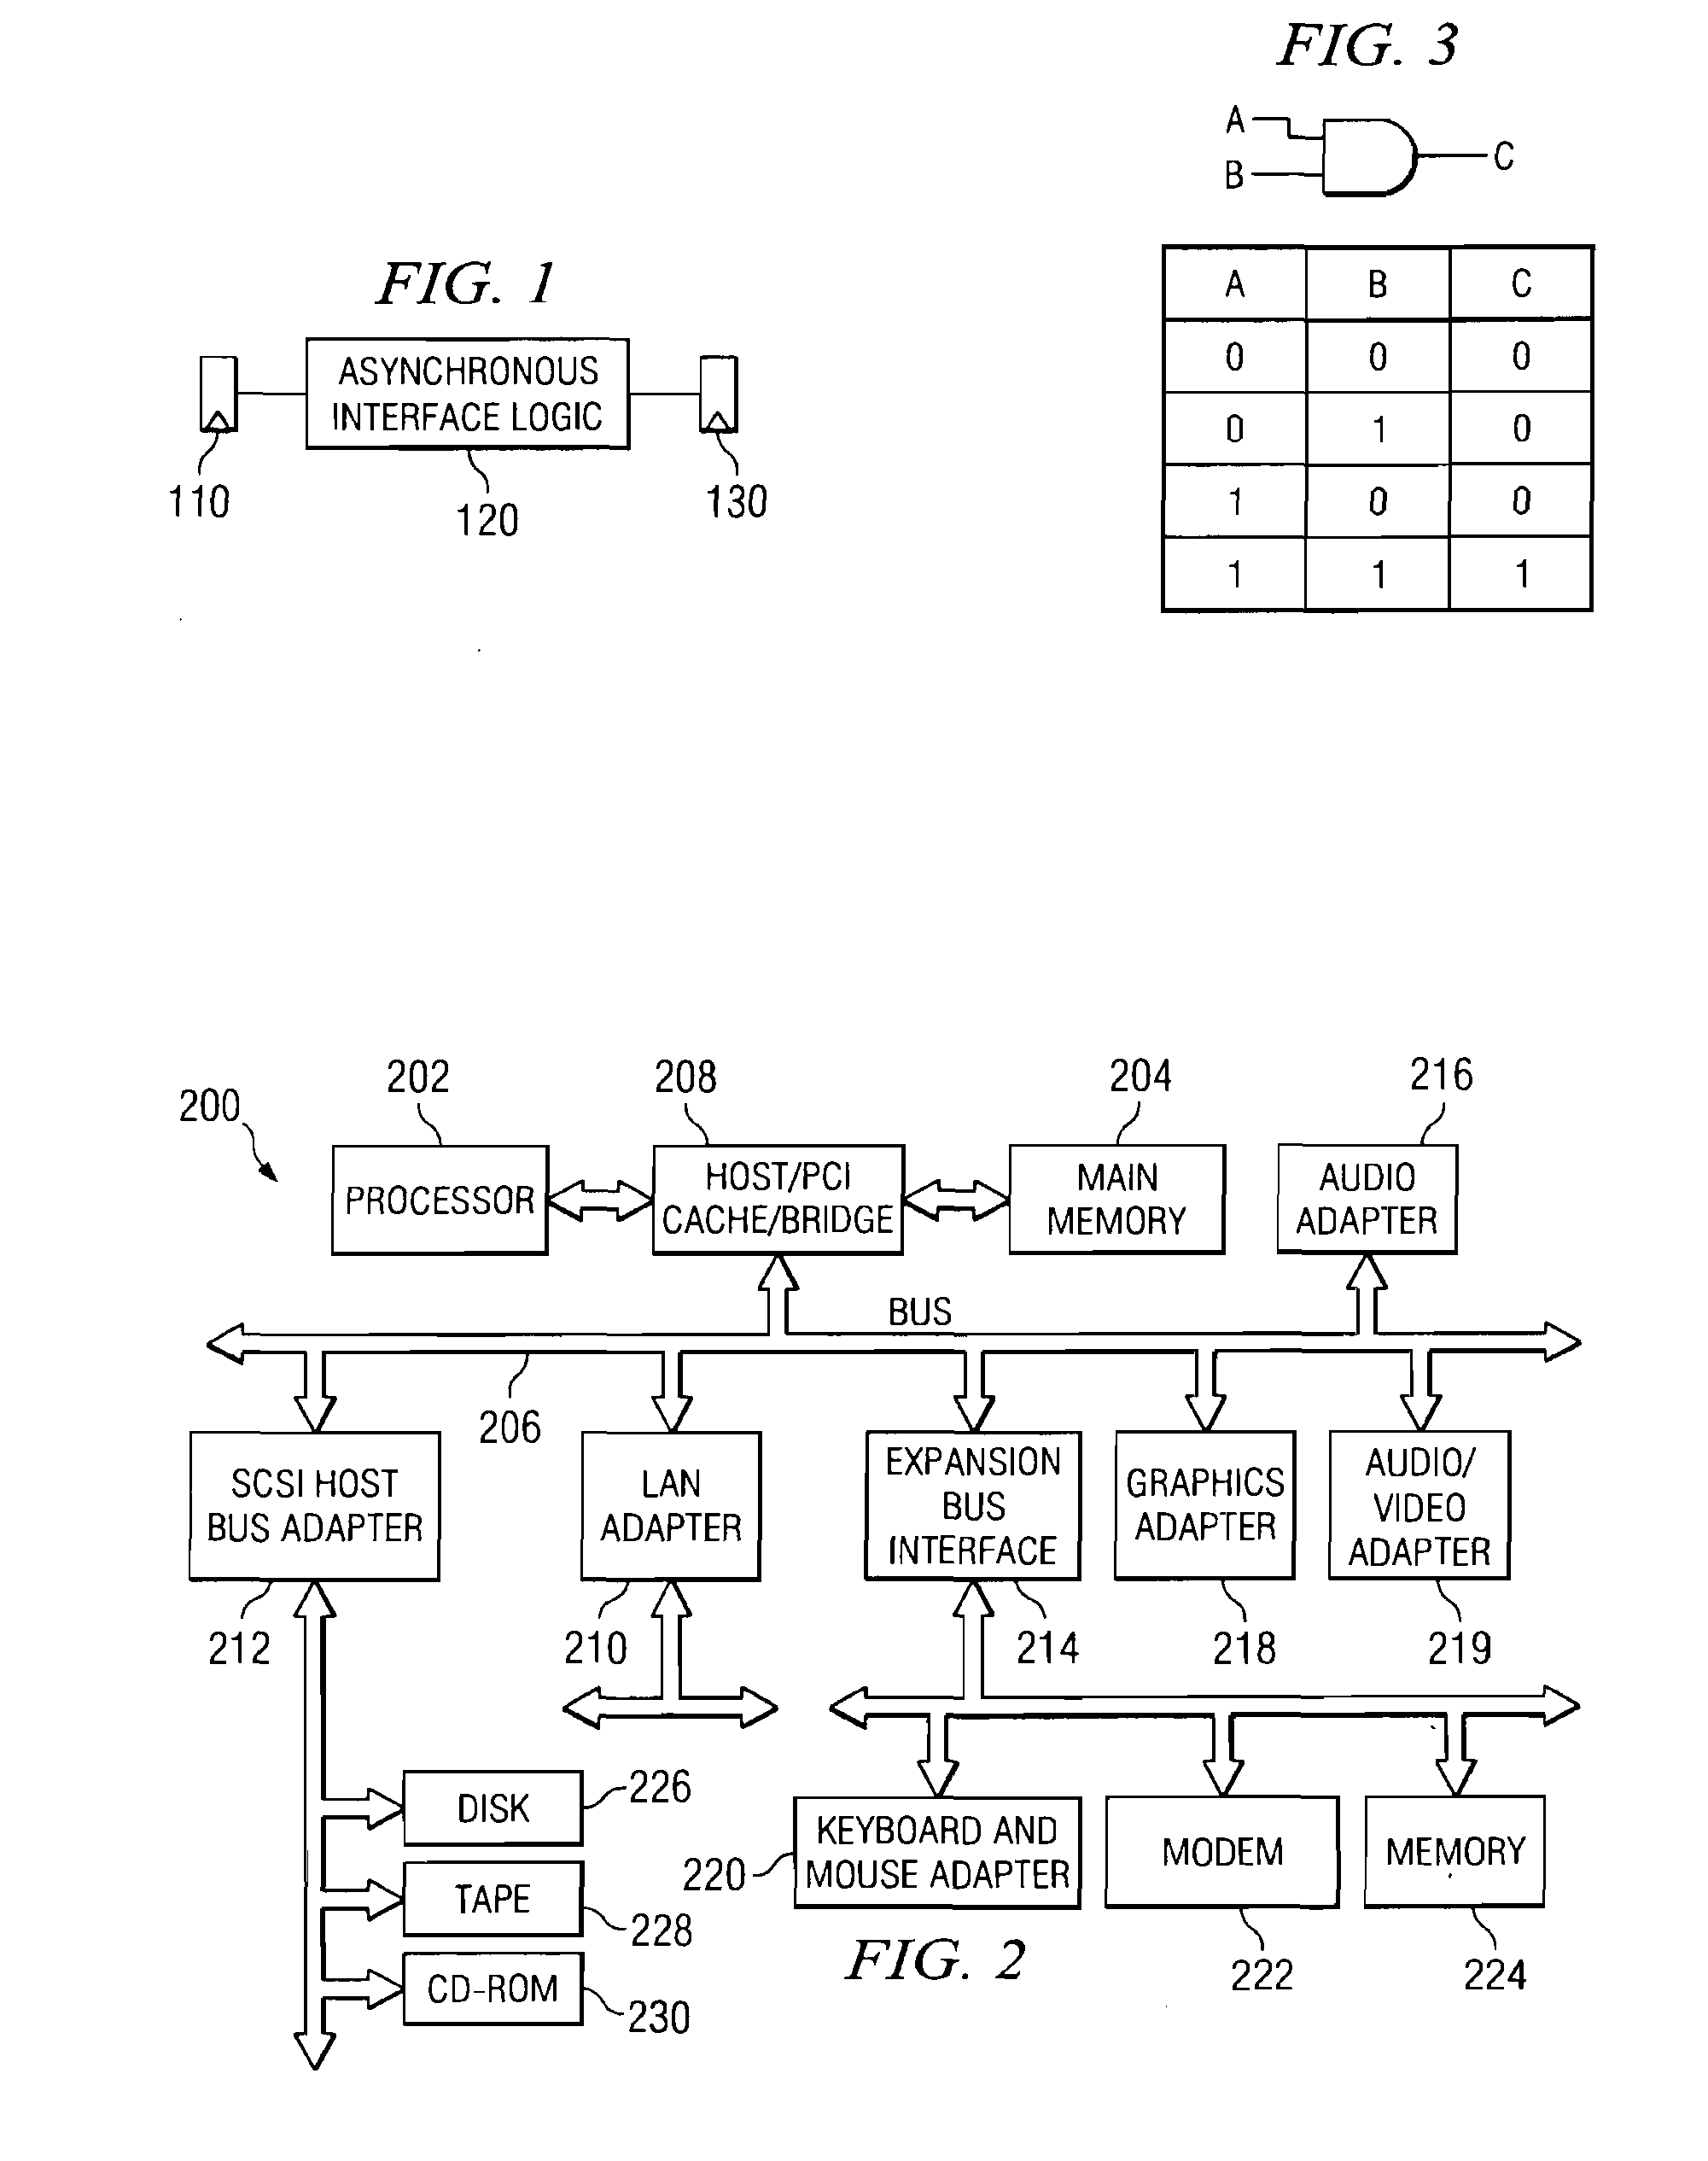 System and Method for Accurately Modeling an Asynchronous Interface using Expanded Logic Elements